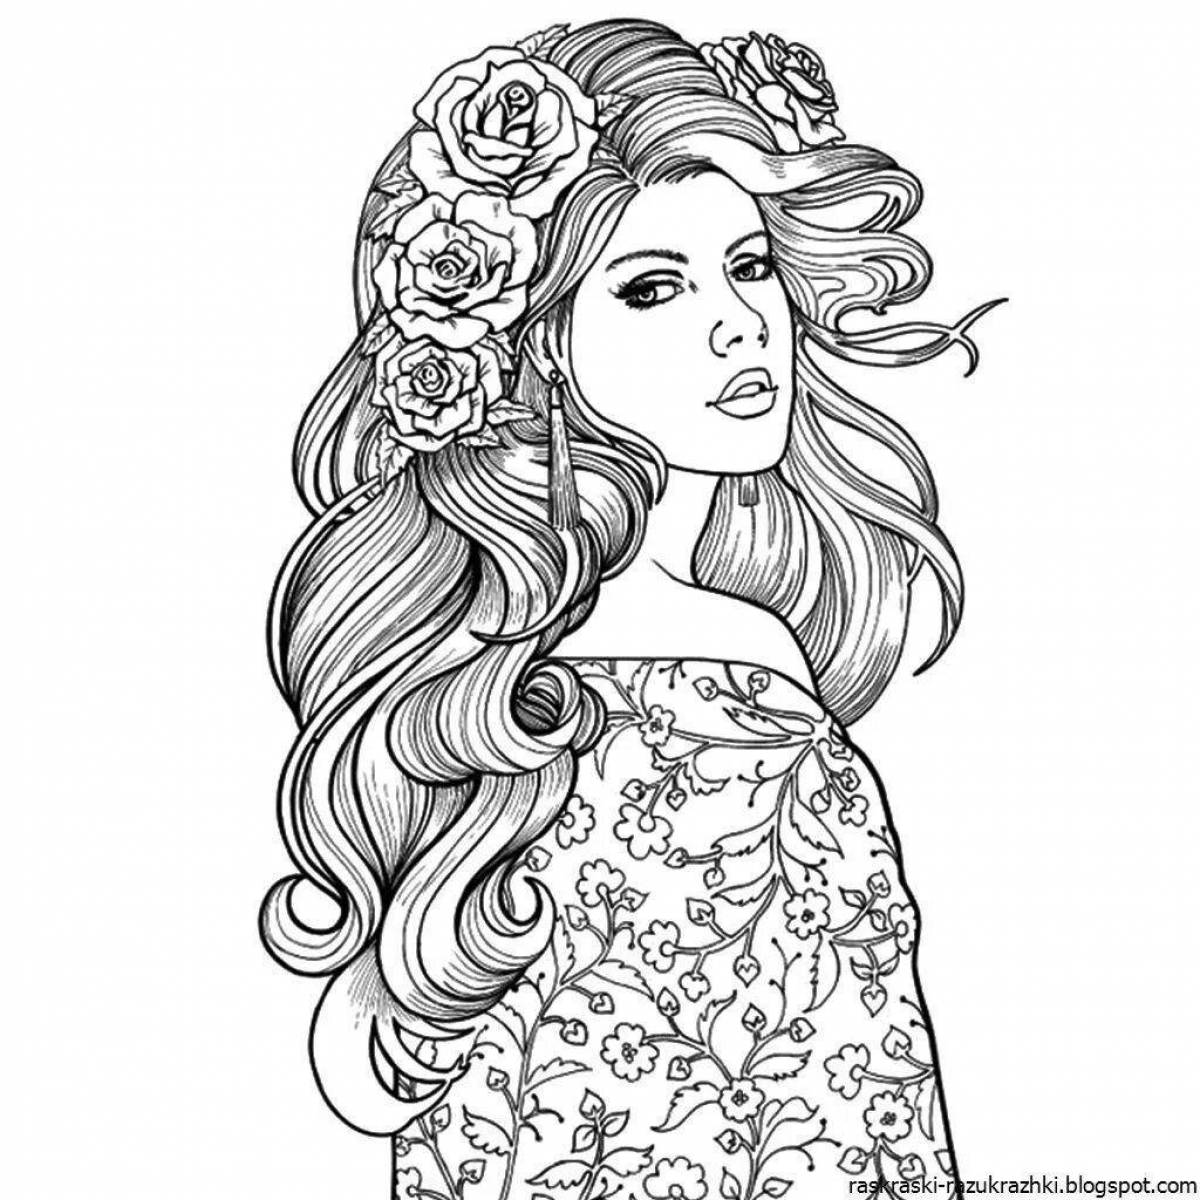 A fascinating coloring book for girls aged 16-17